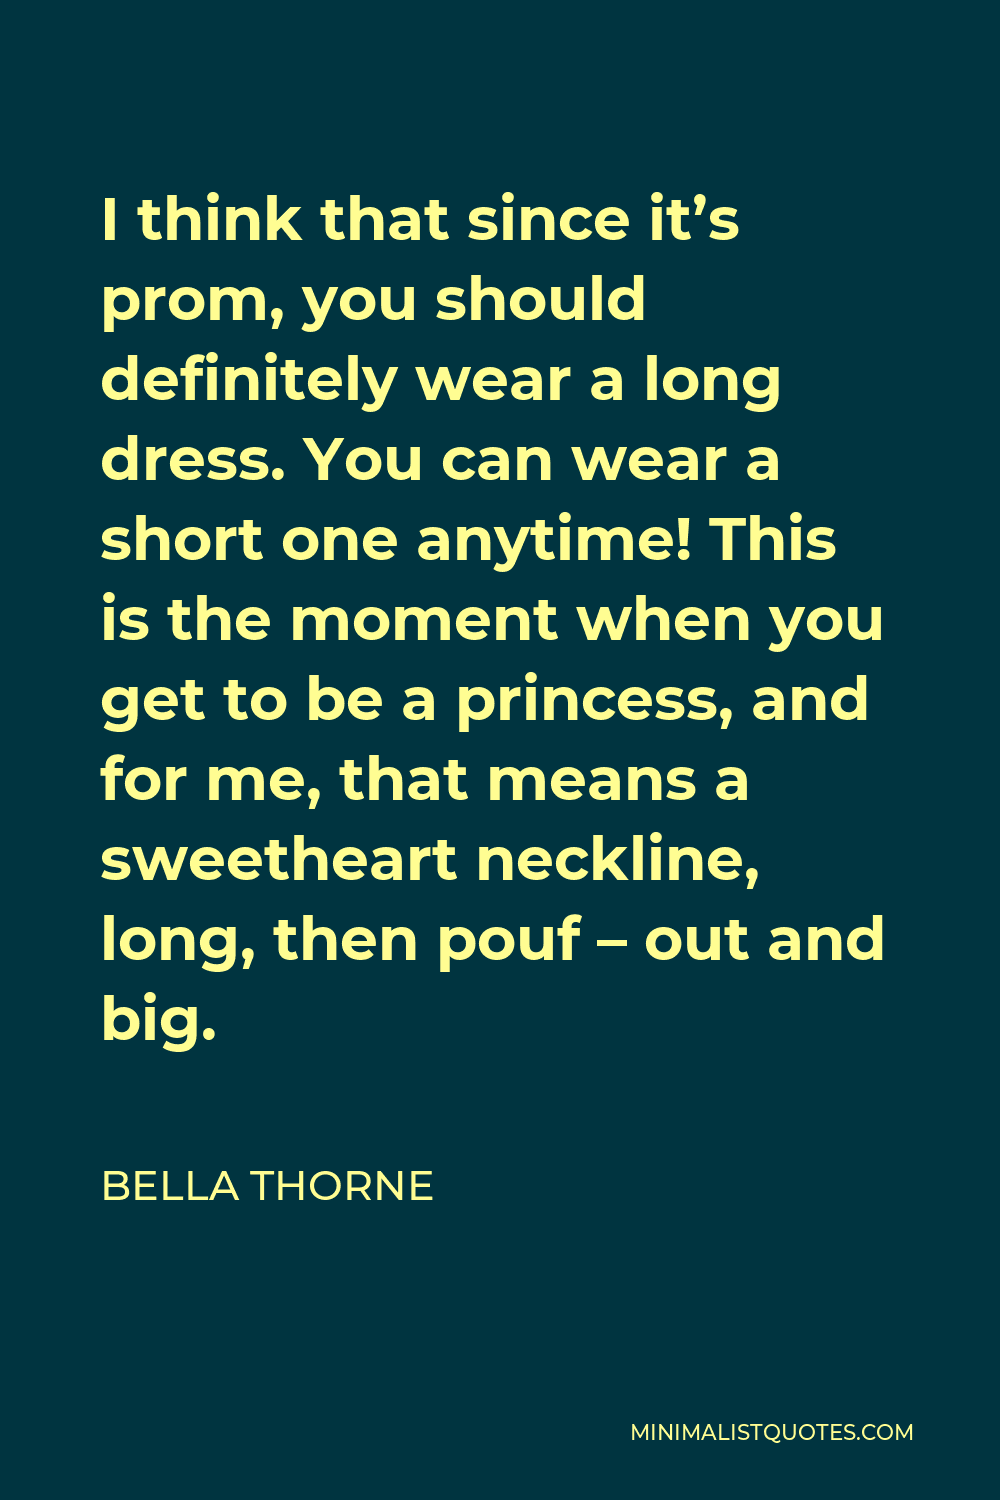 Bella Thorne Quote - I think that since it’s prom, you should definitely wear a long dress. You can wear a short one anytime! This is the moment when you get to be a princess, and for me, that means a sweetheart neckline, long, then pouf – out and big.